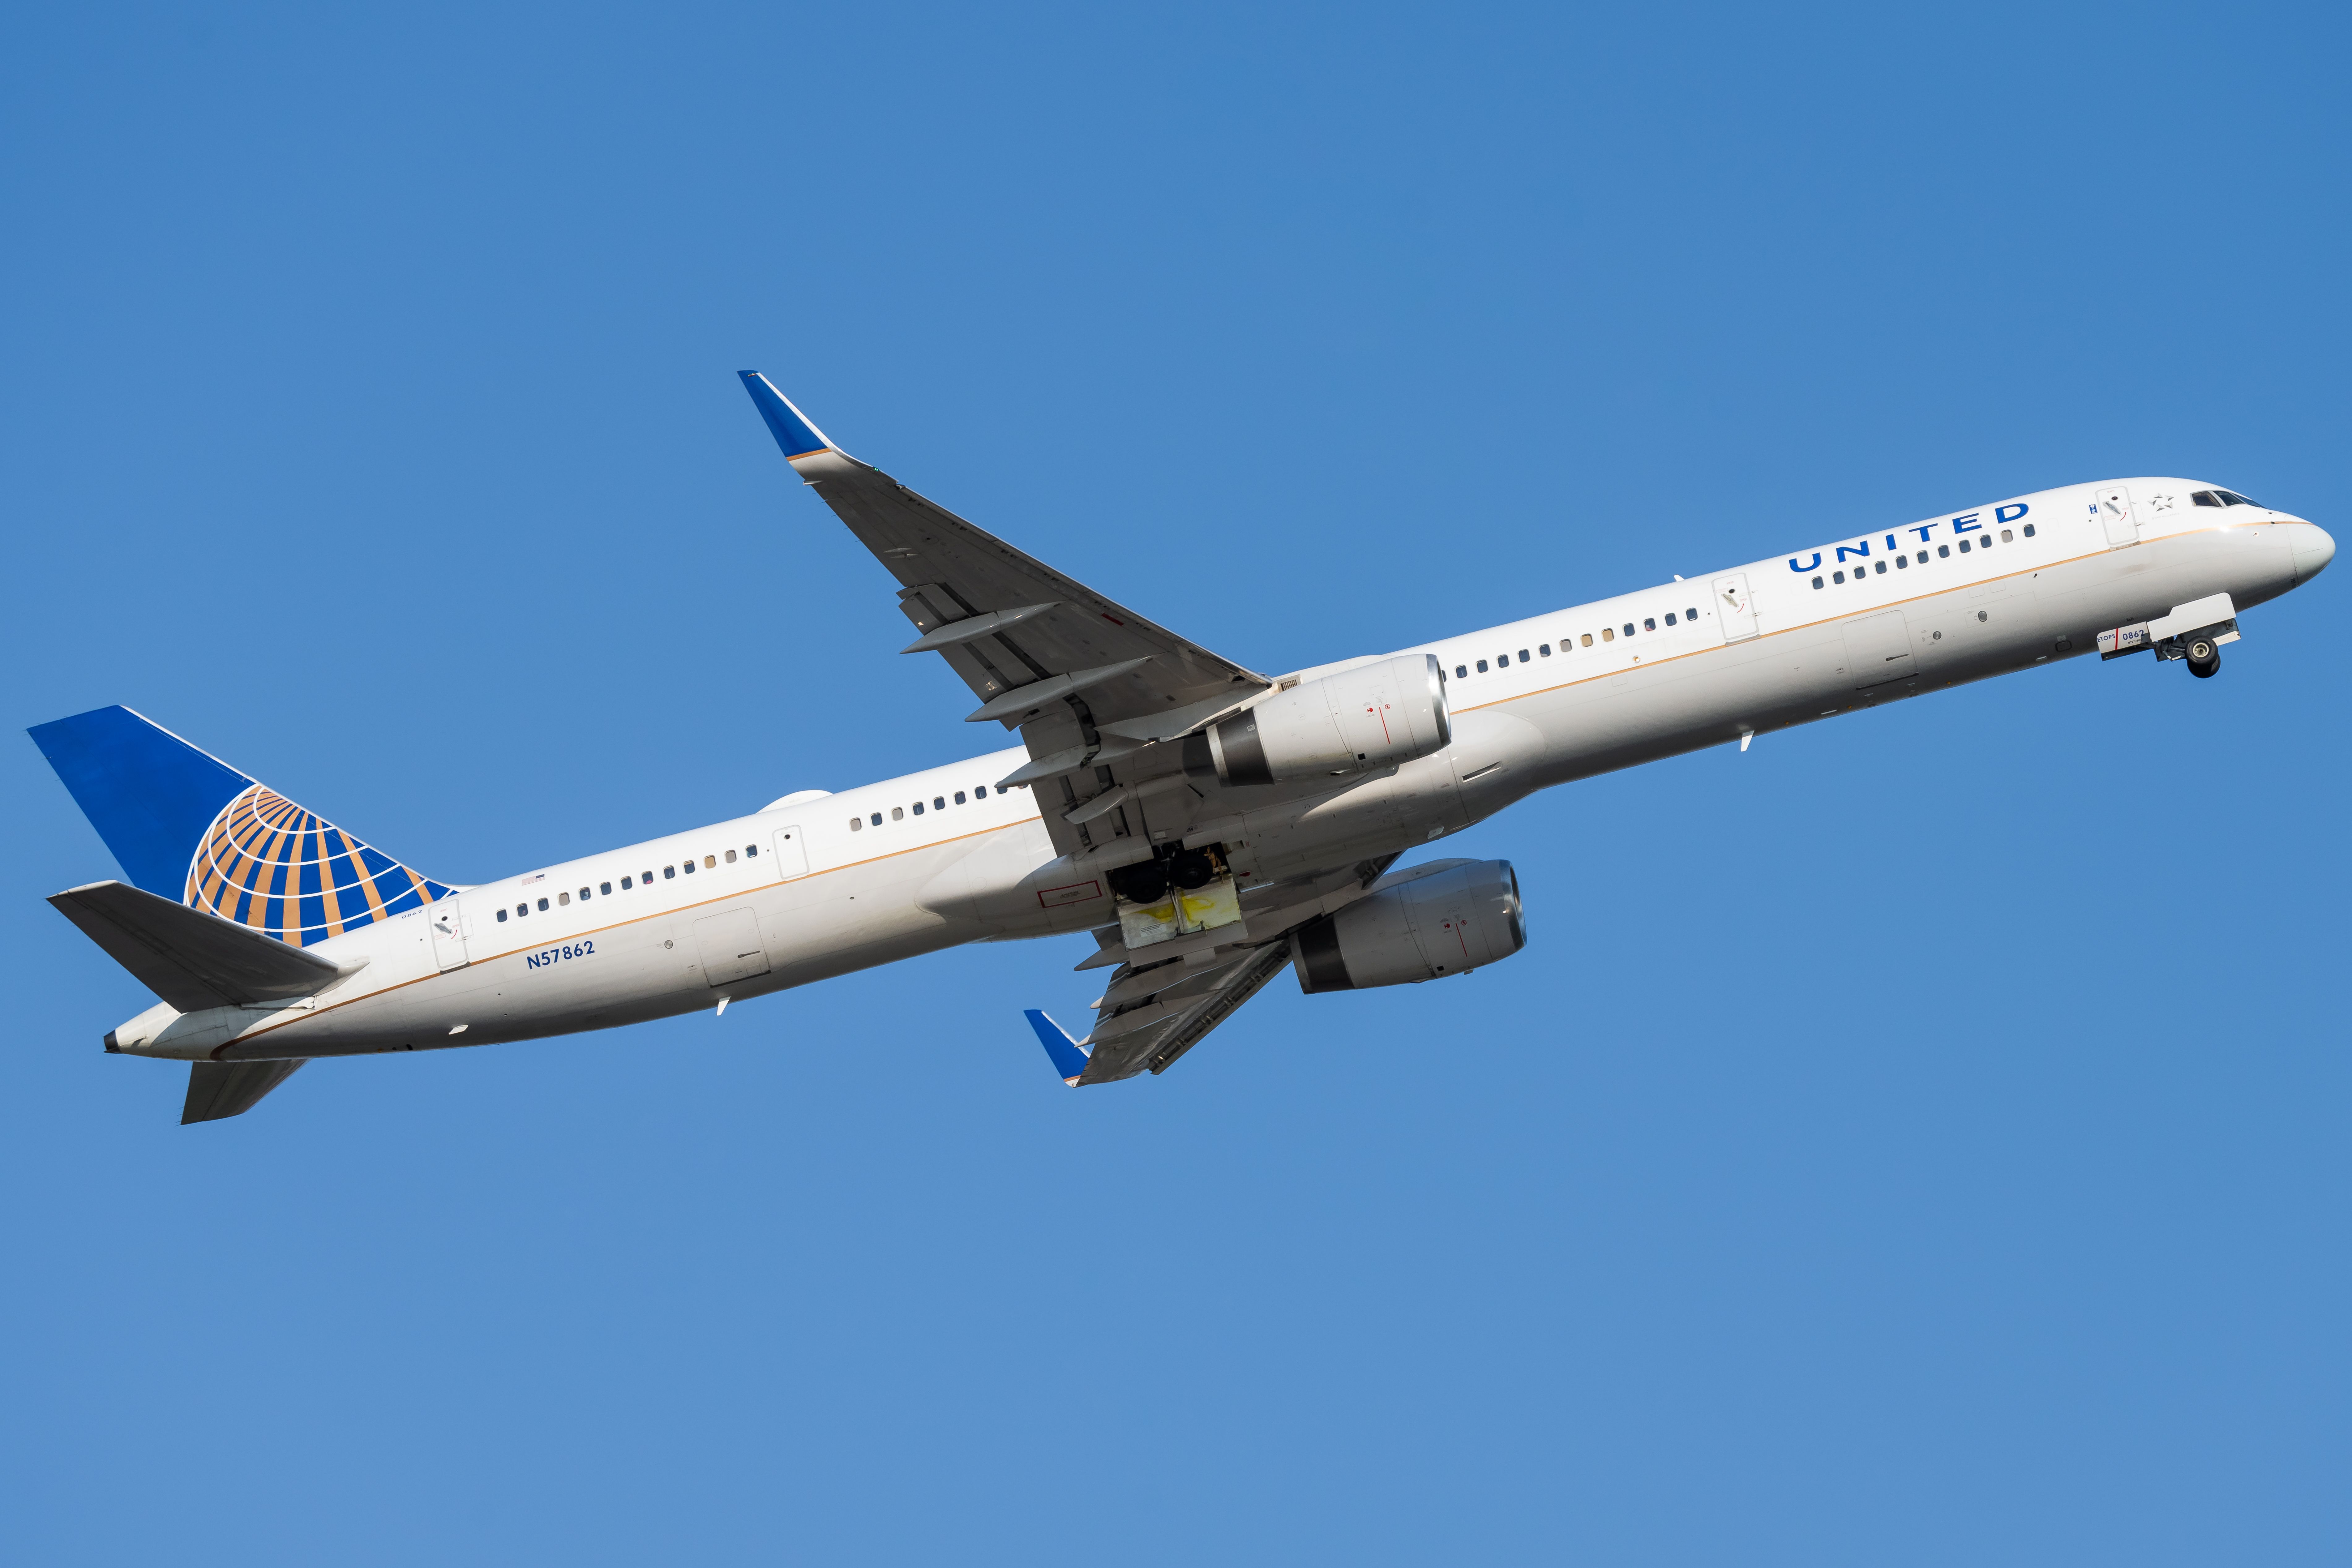 Which Airlines Fly The Most Boeing 757s Today?